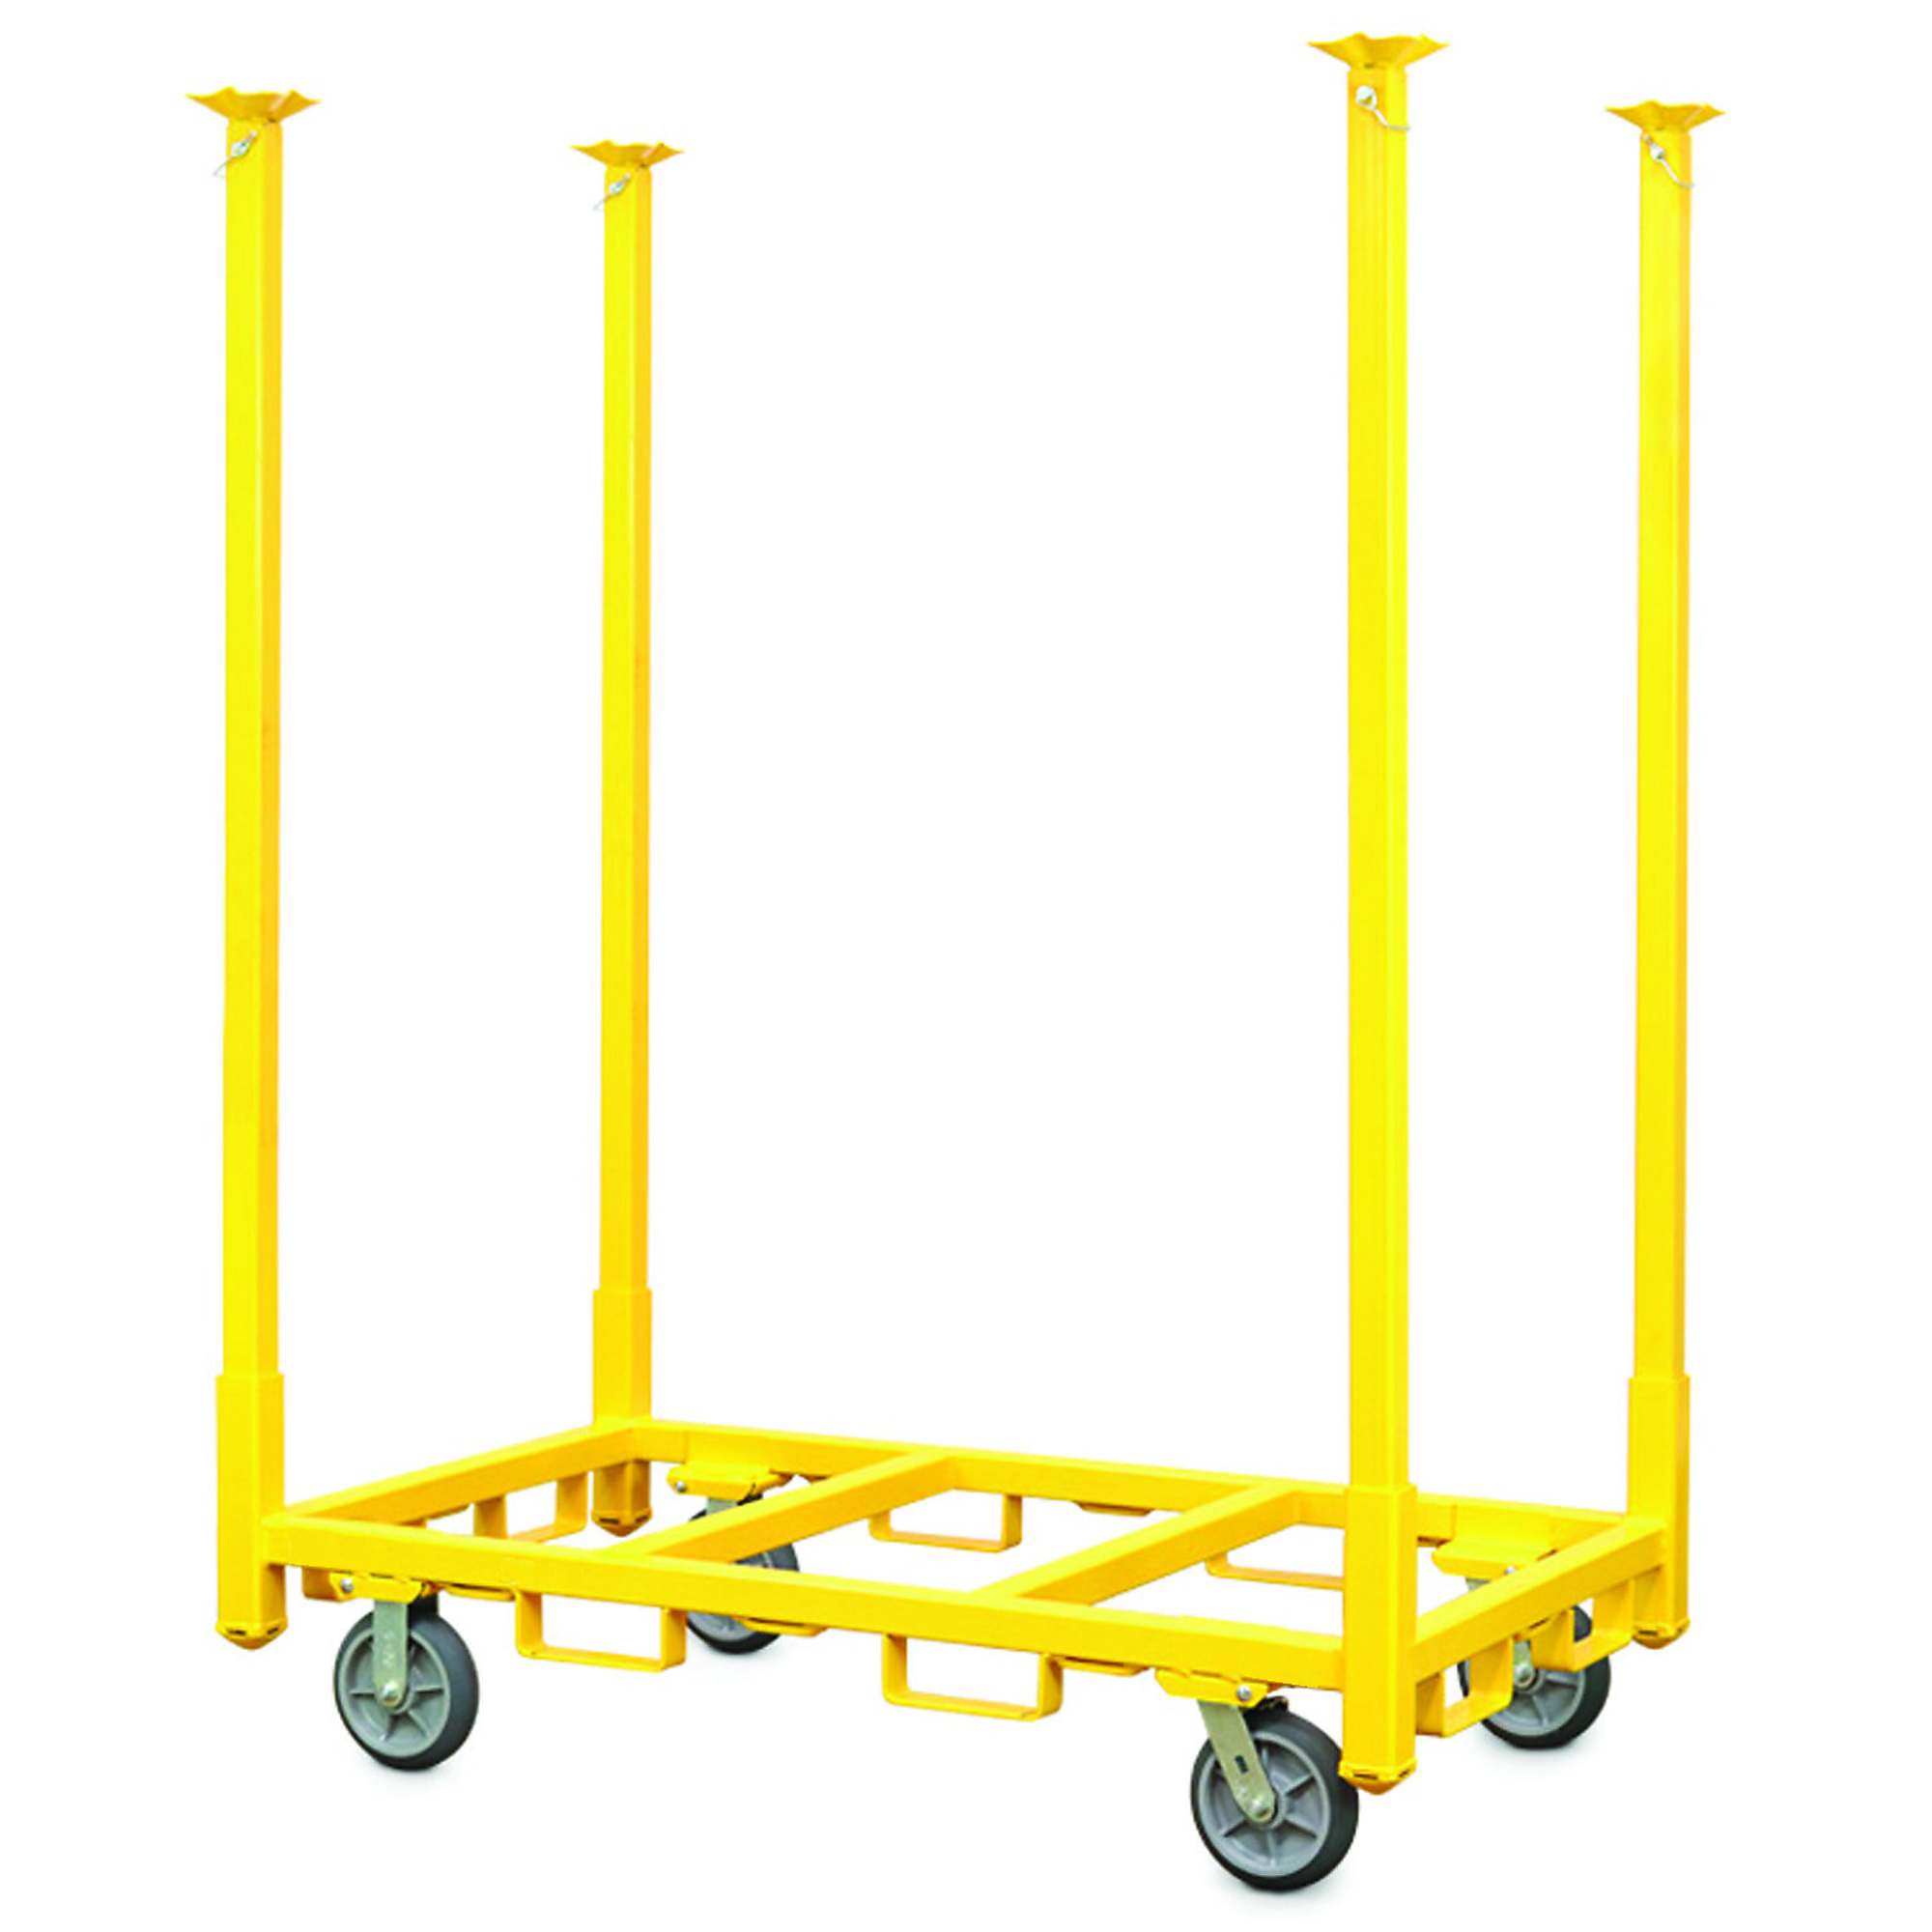 Snap-Loc Cargo Control, 4-Wheel Chair Table Storage Cart, Load Capacity 3000 lb, Height 73 in, Material Steel, Model SLV3000SCY